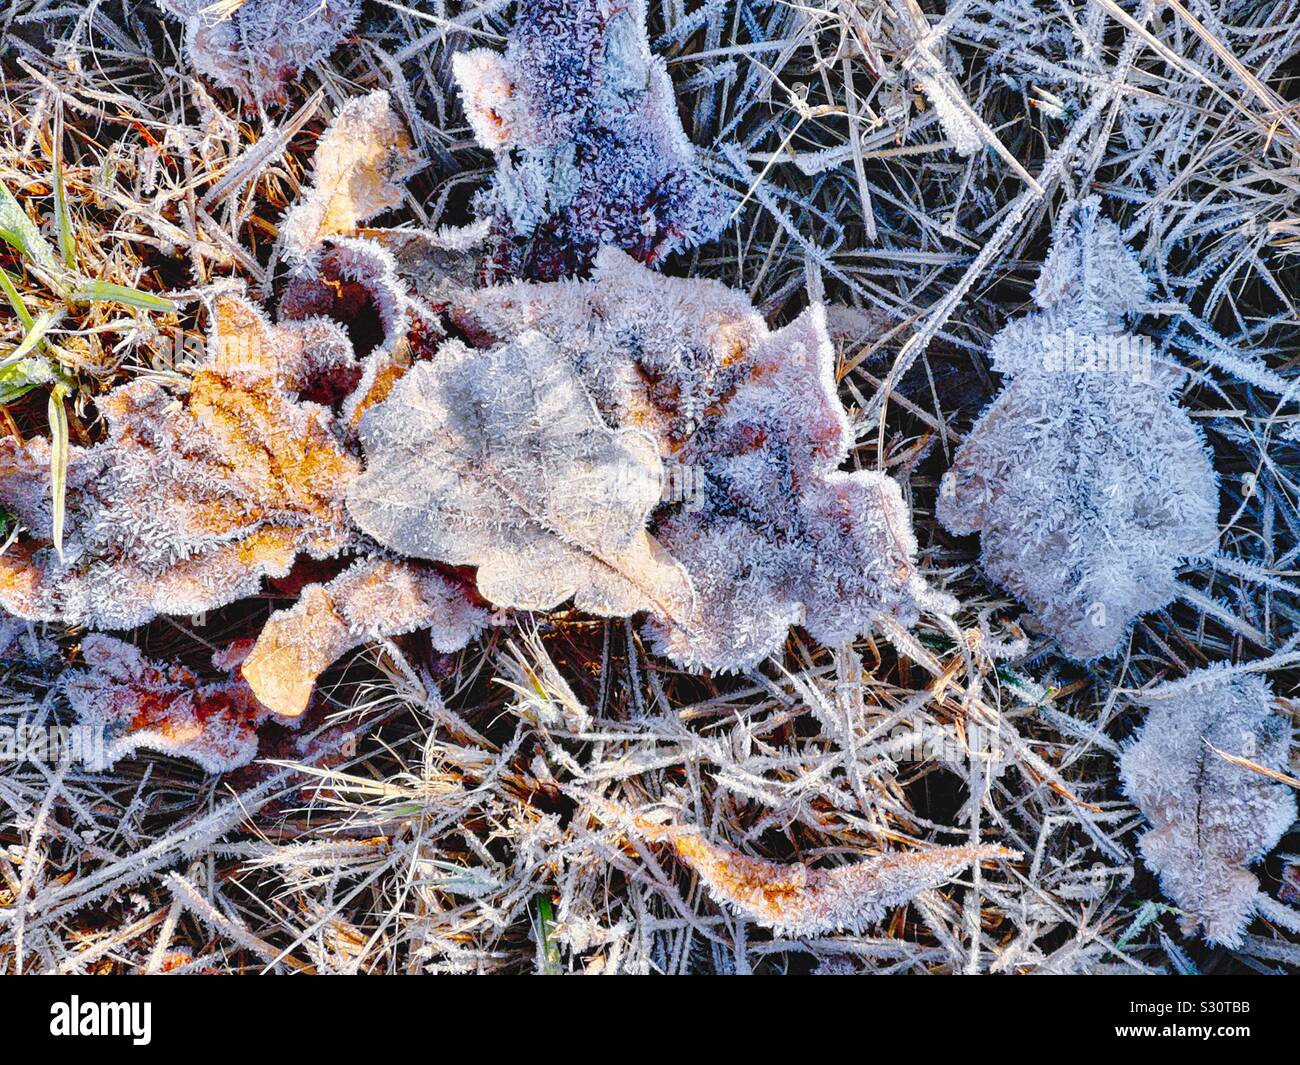 Autumn leaves covered in ice frost as seasons change from autumn to winter, Sweden Stock Photo